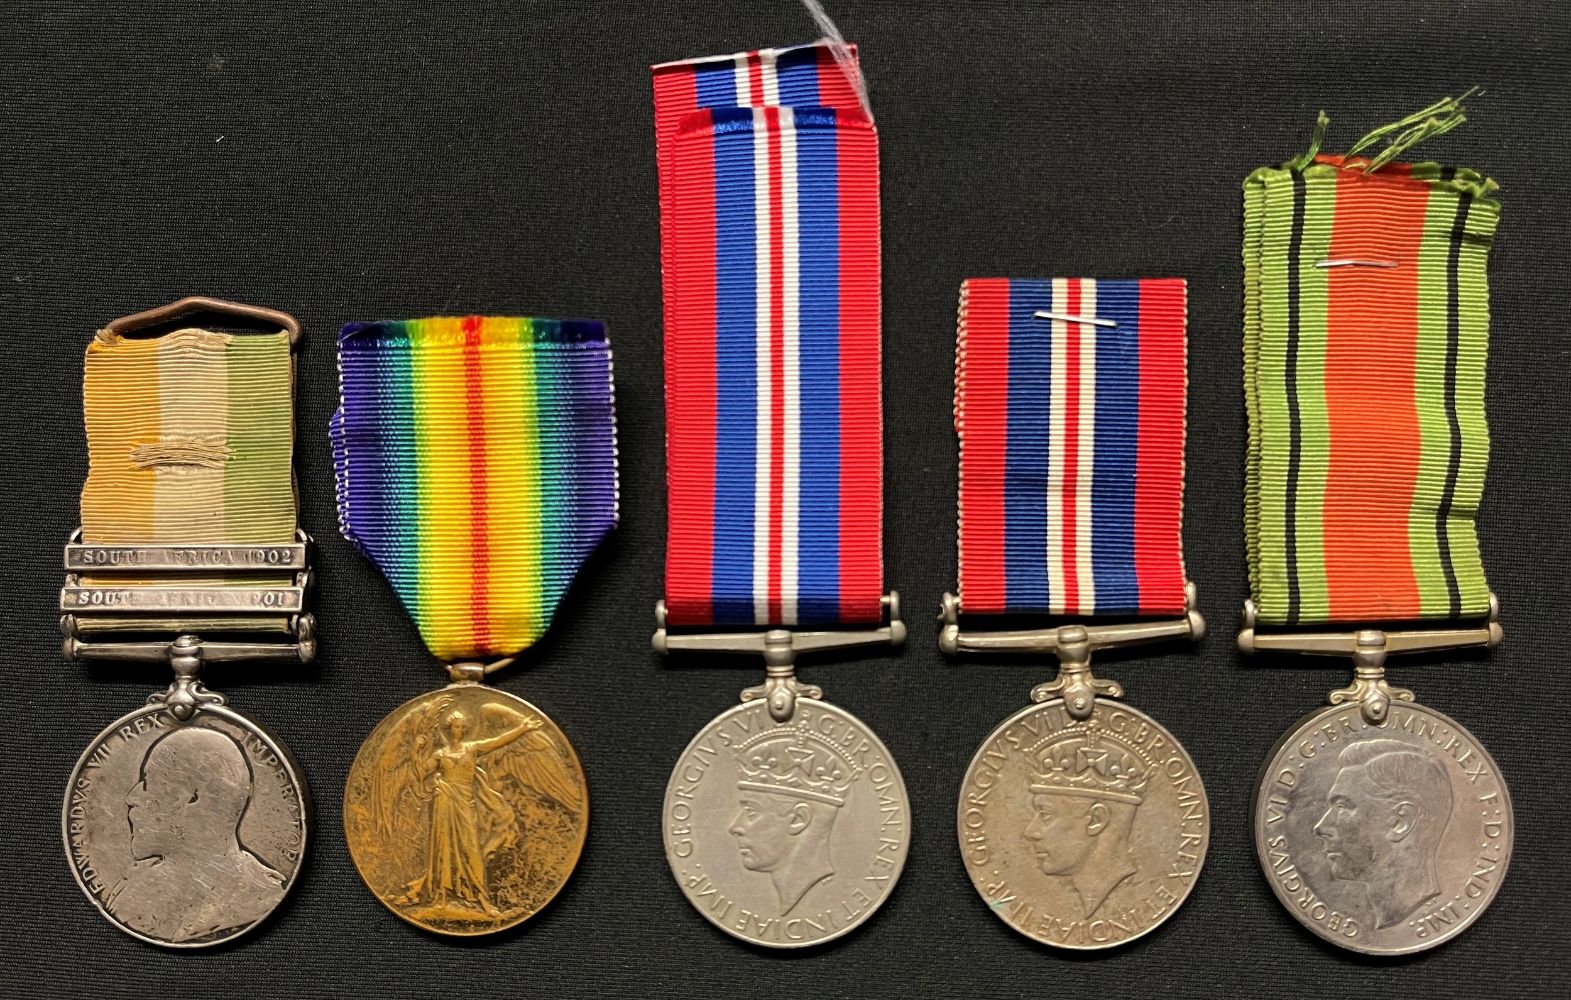 The Derby Saleroom Medals, Militaria and Firearms Auction - online bidding only